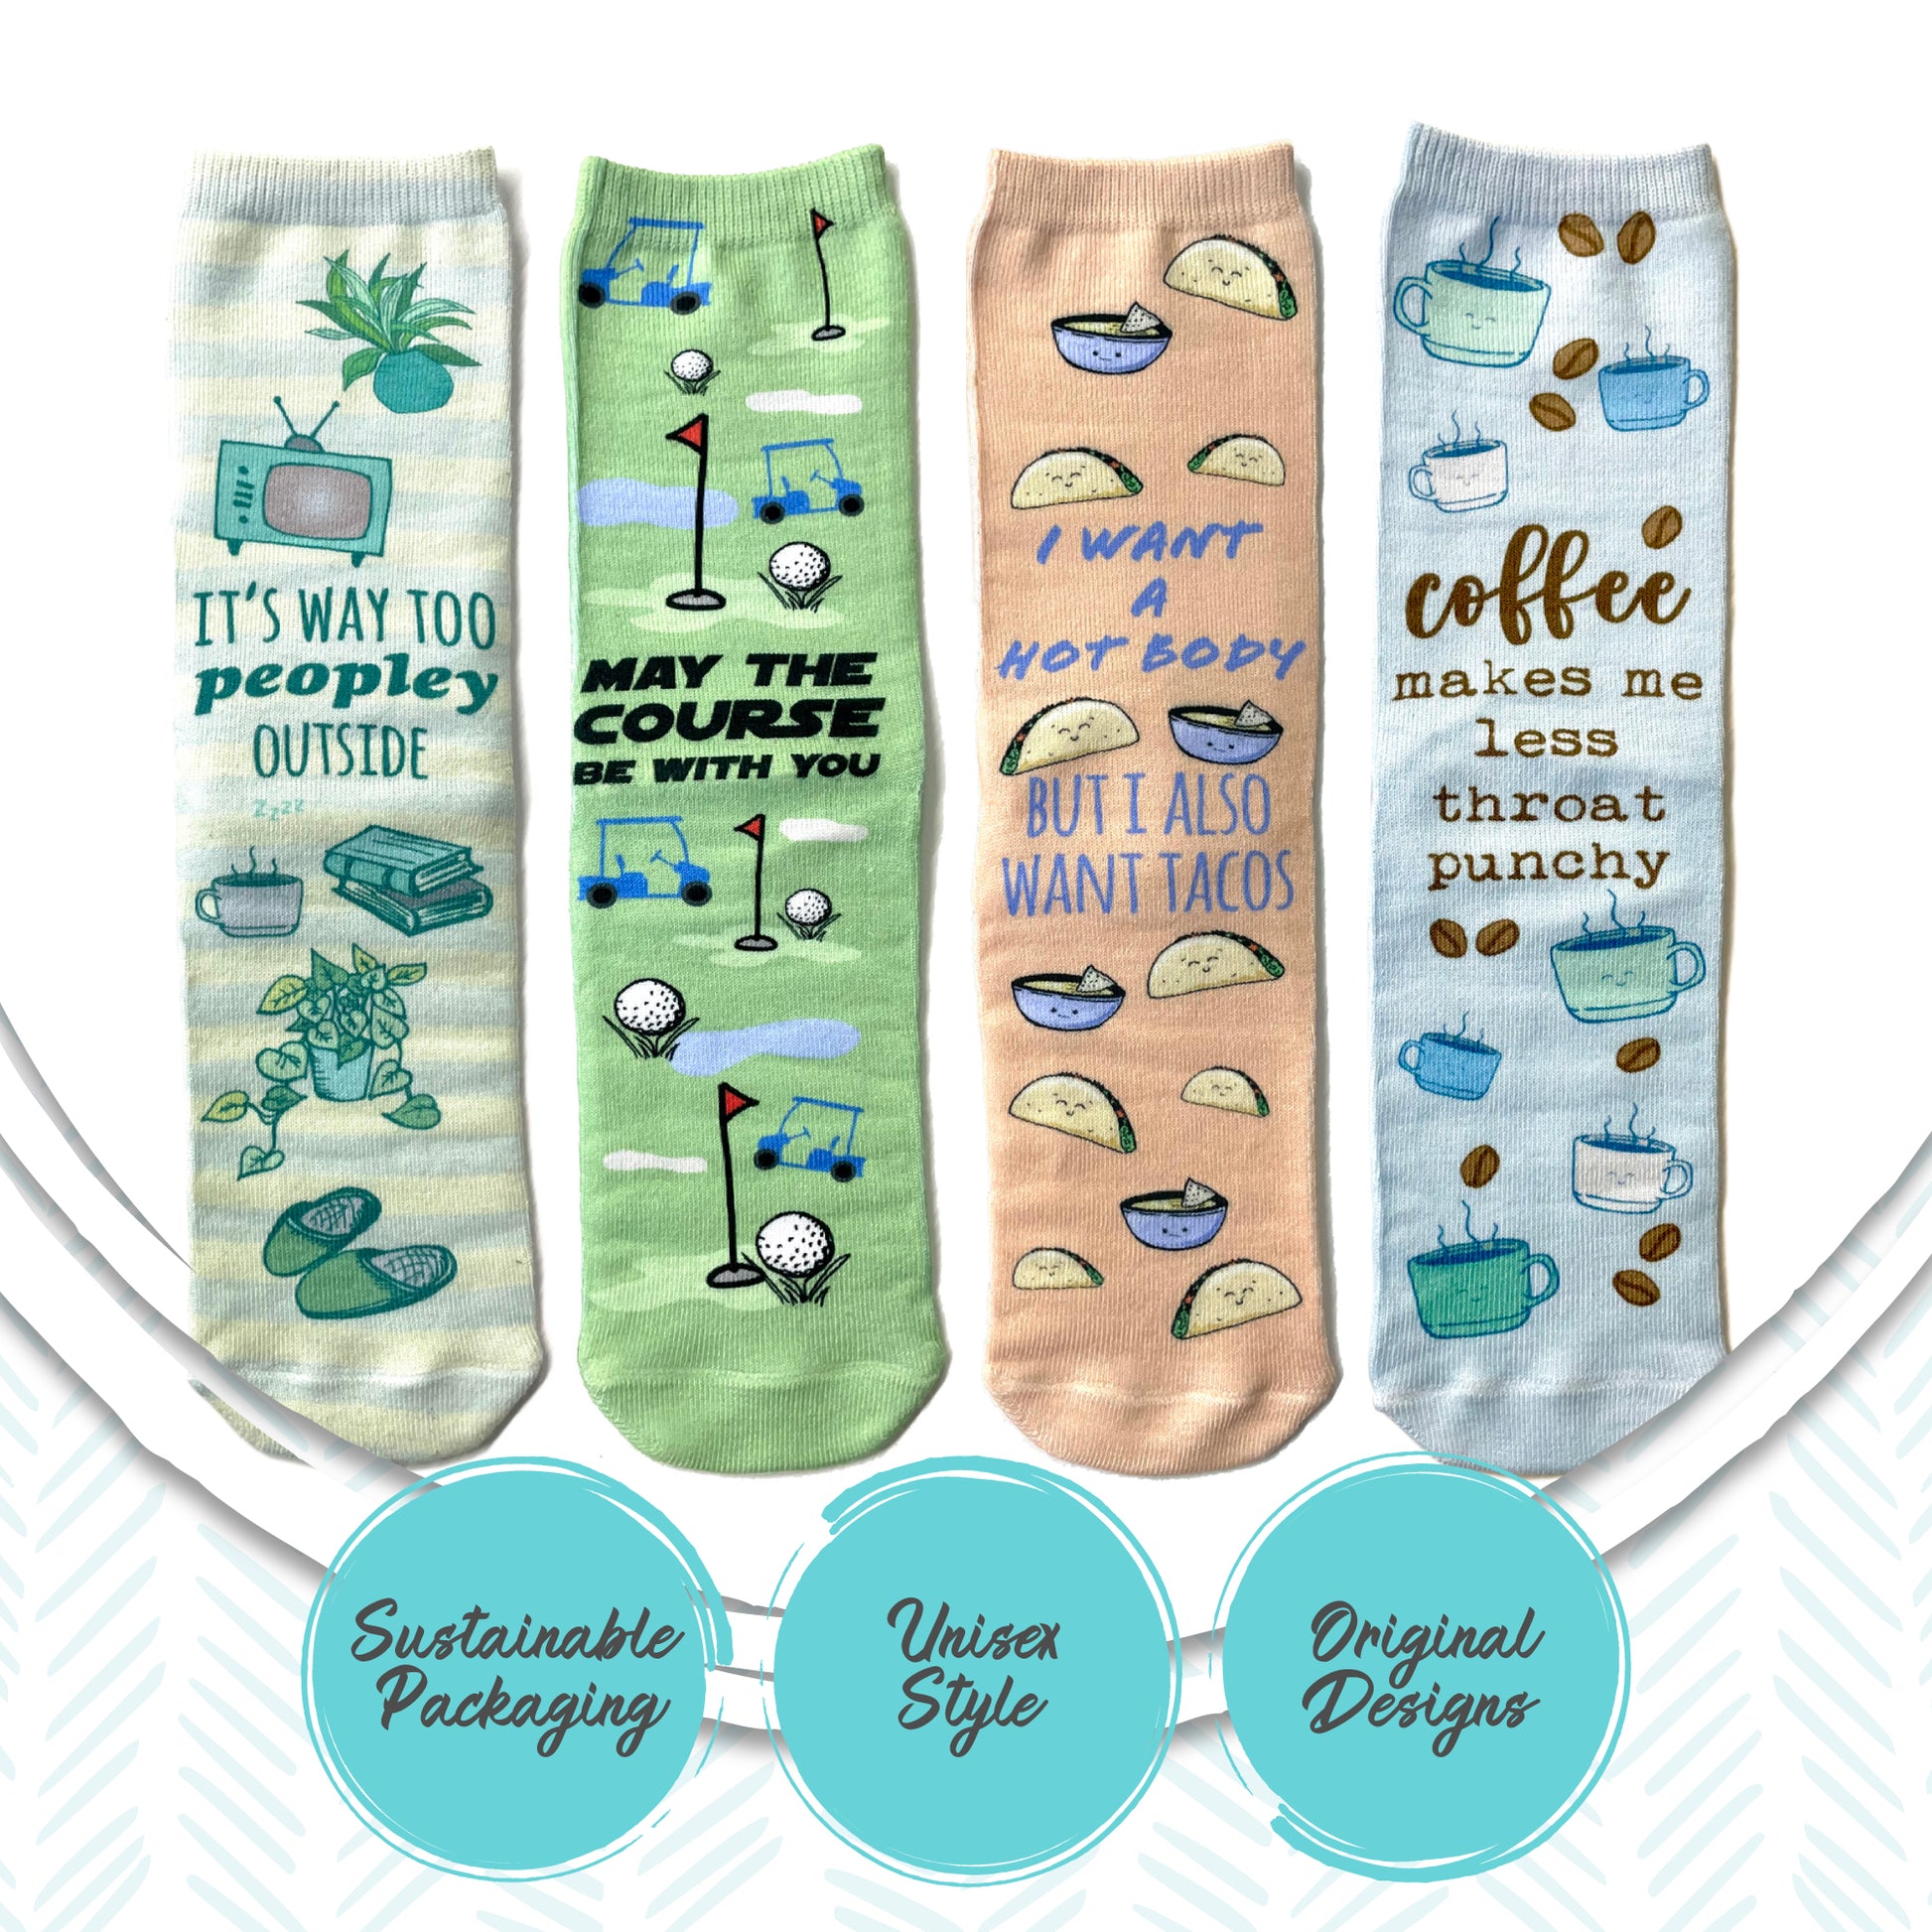 Coffee Makes Me Less Throat Punchy - Novelty Socks - MoonlightMakers